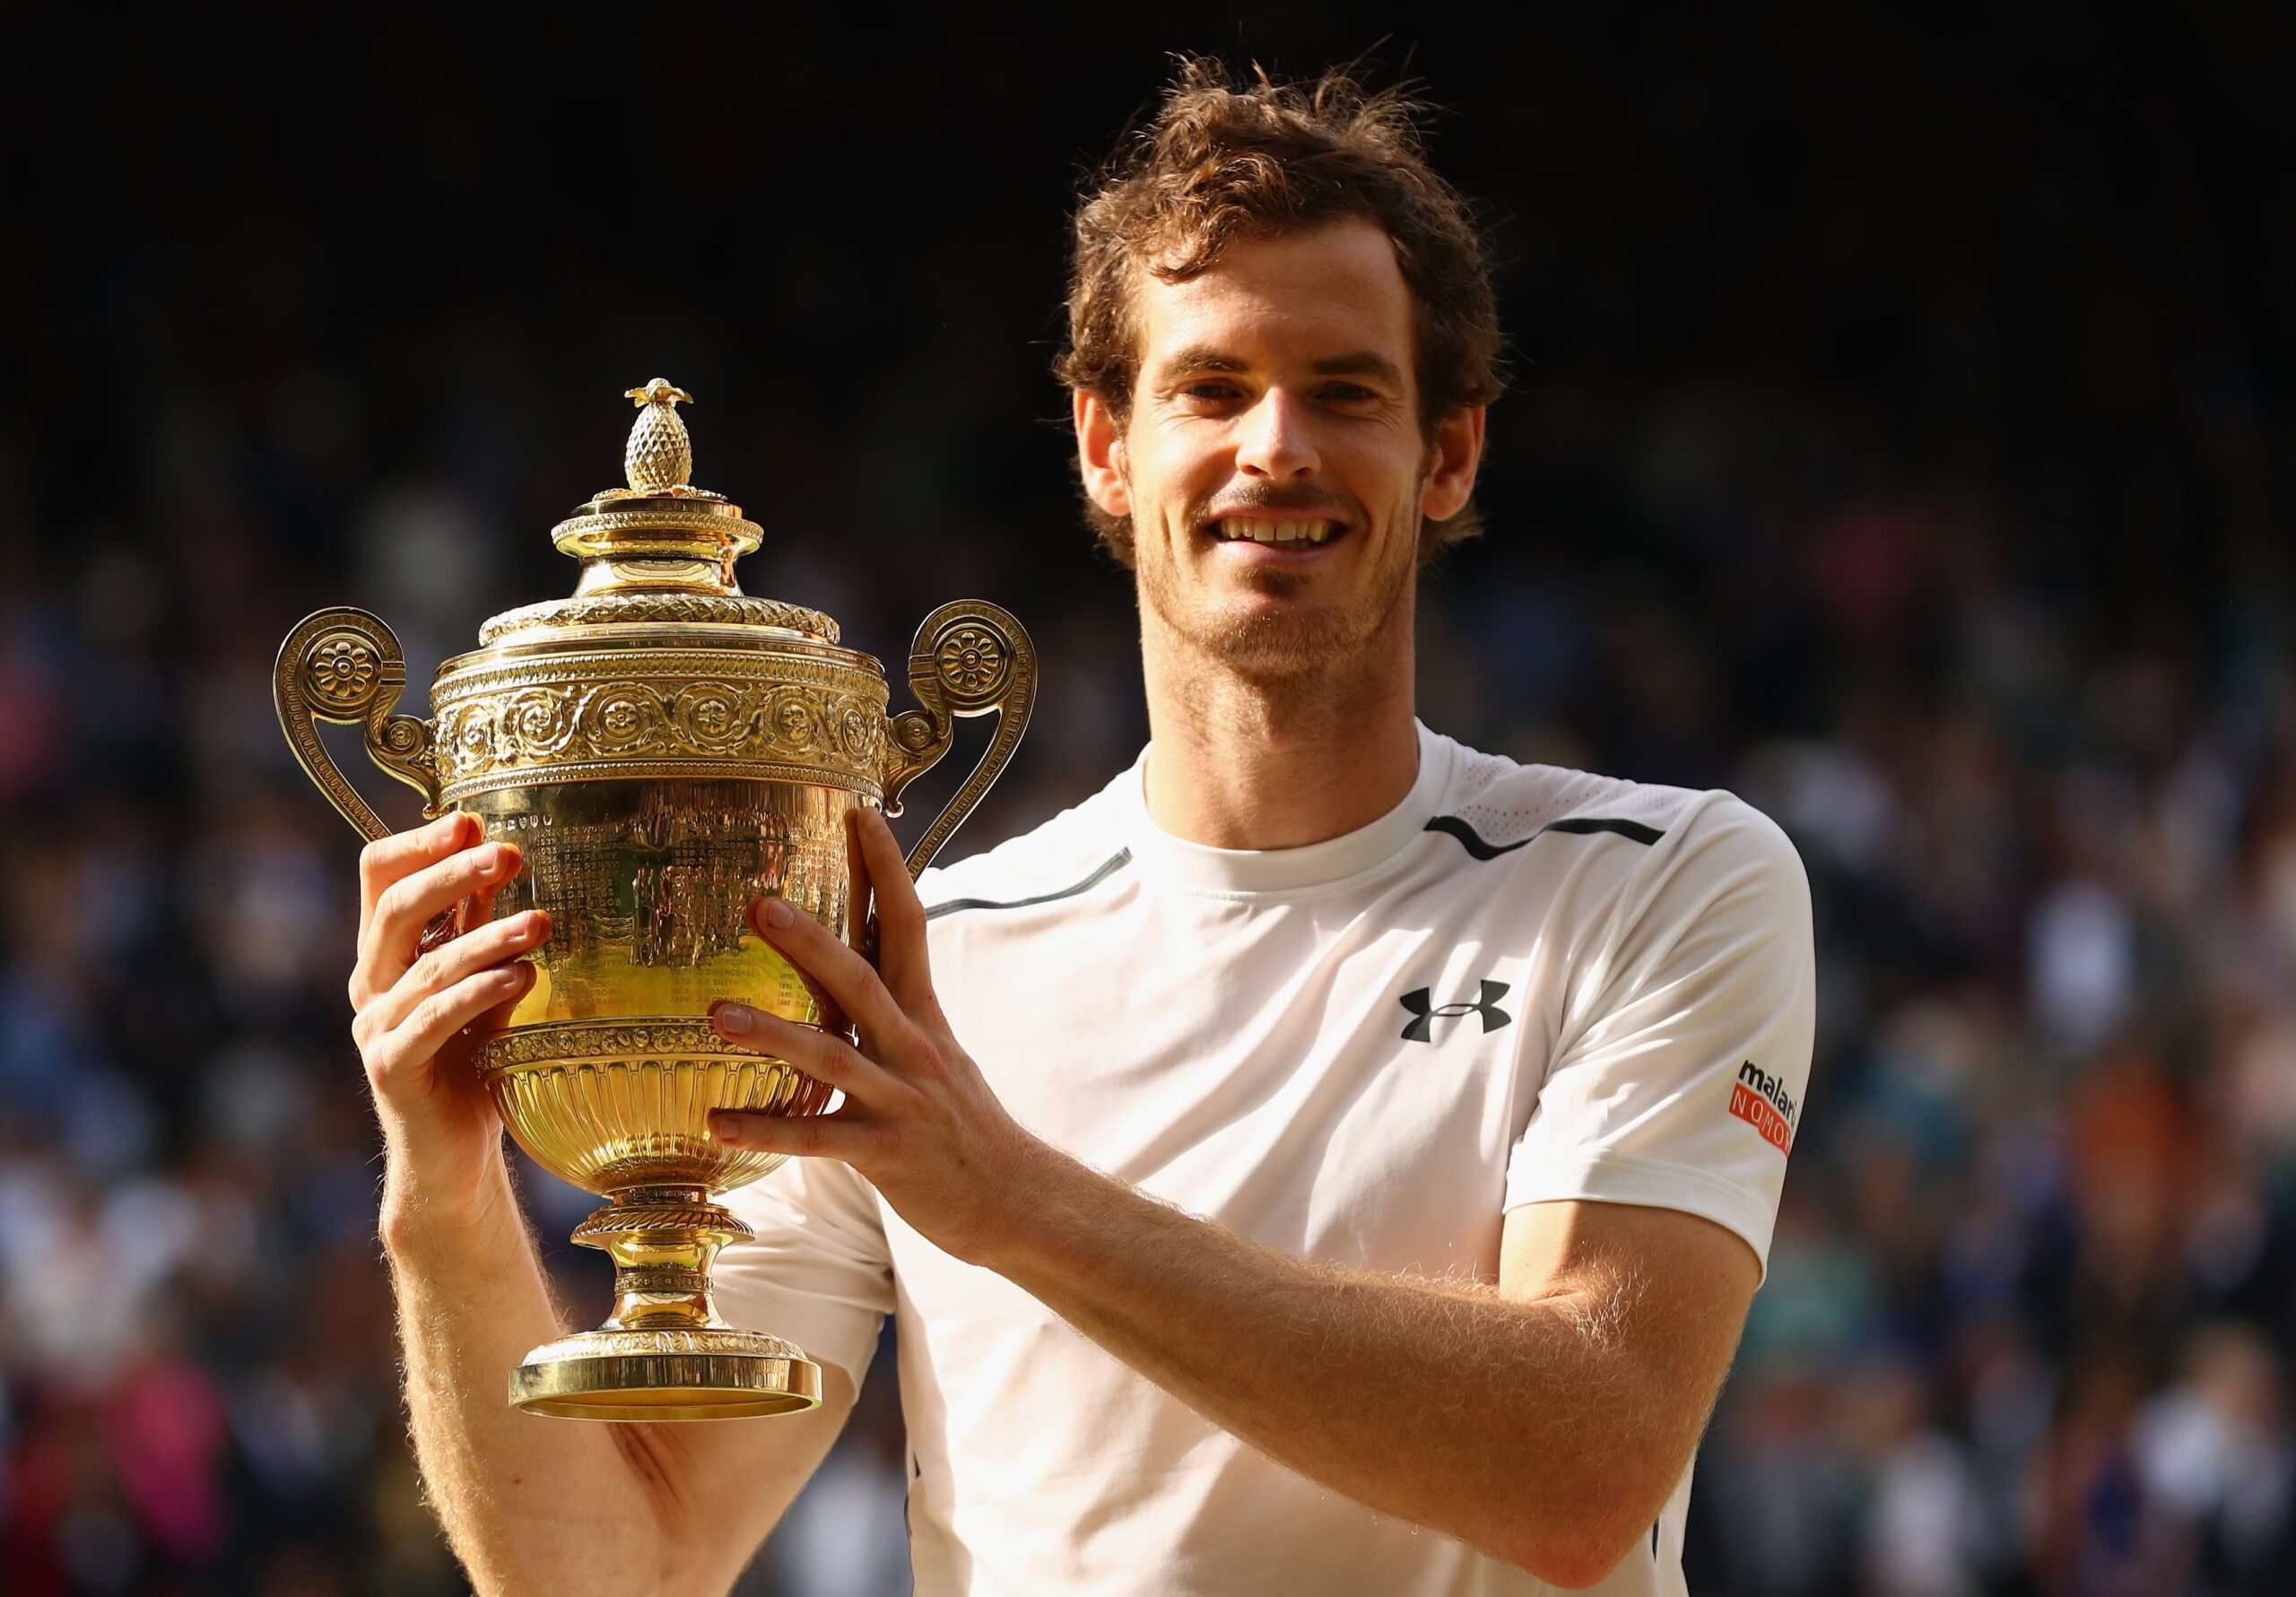 Andy Murray lifting the Wimbledon title scaled